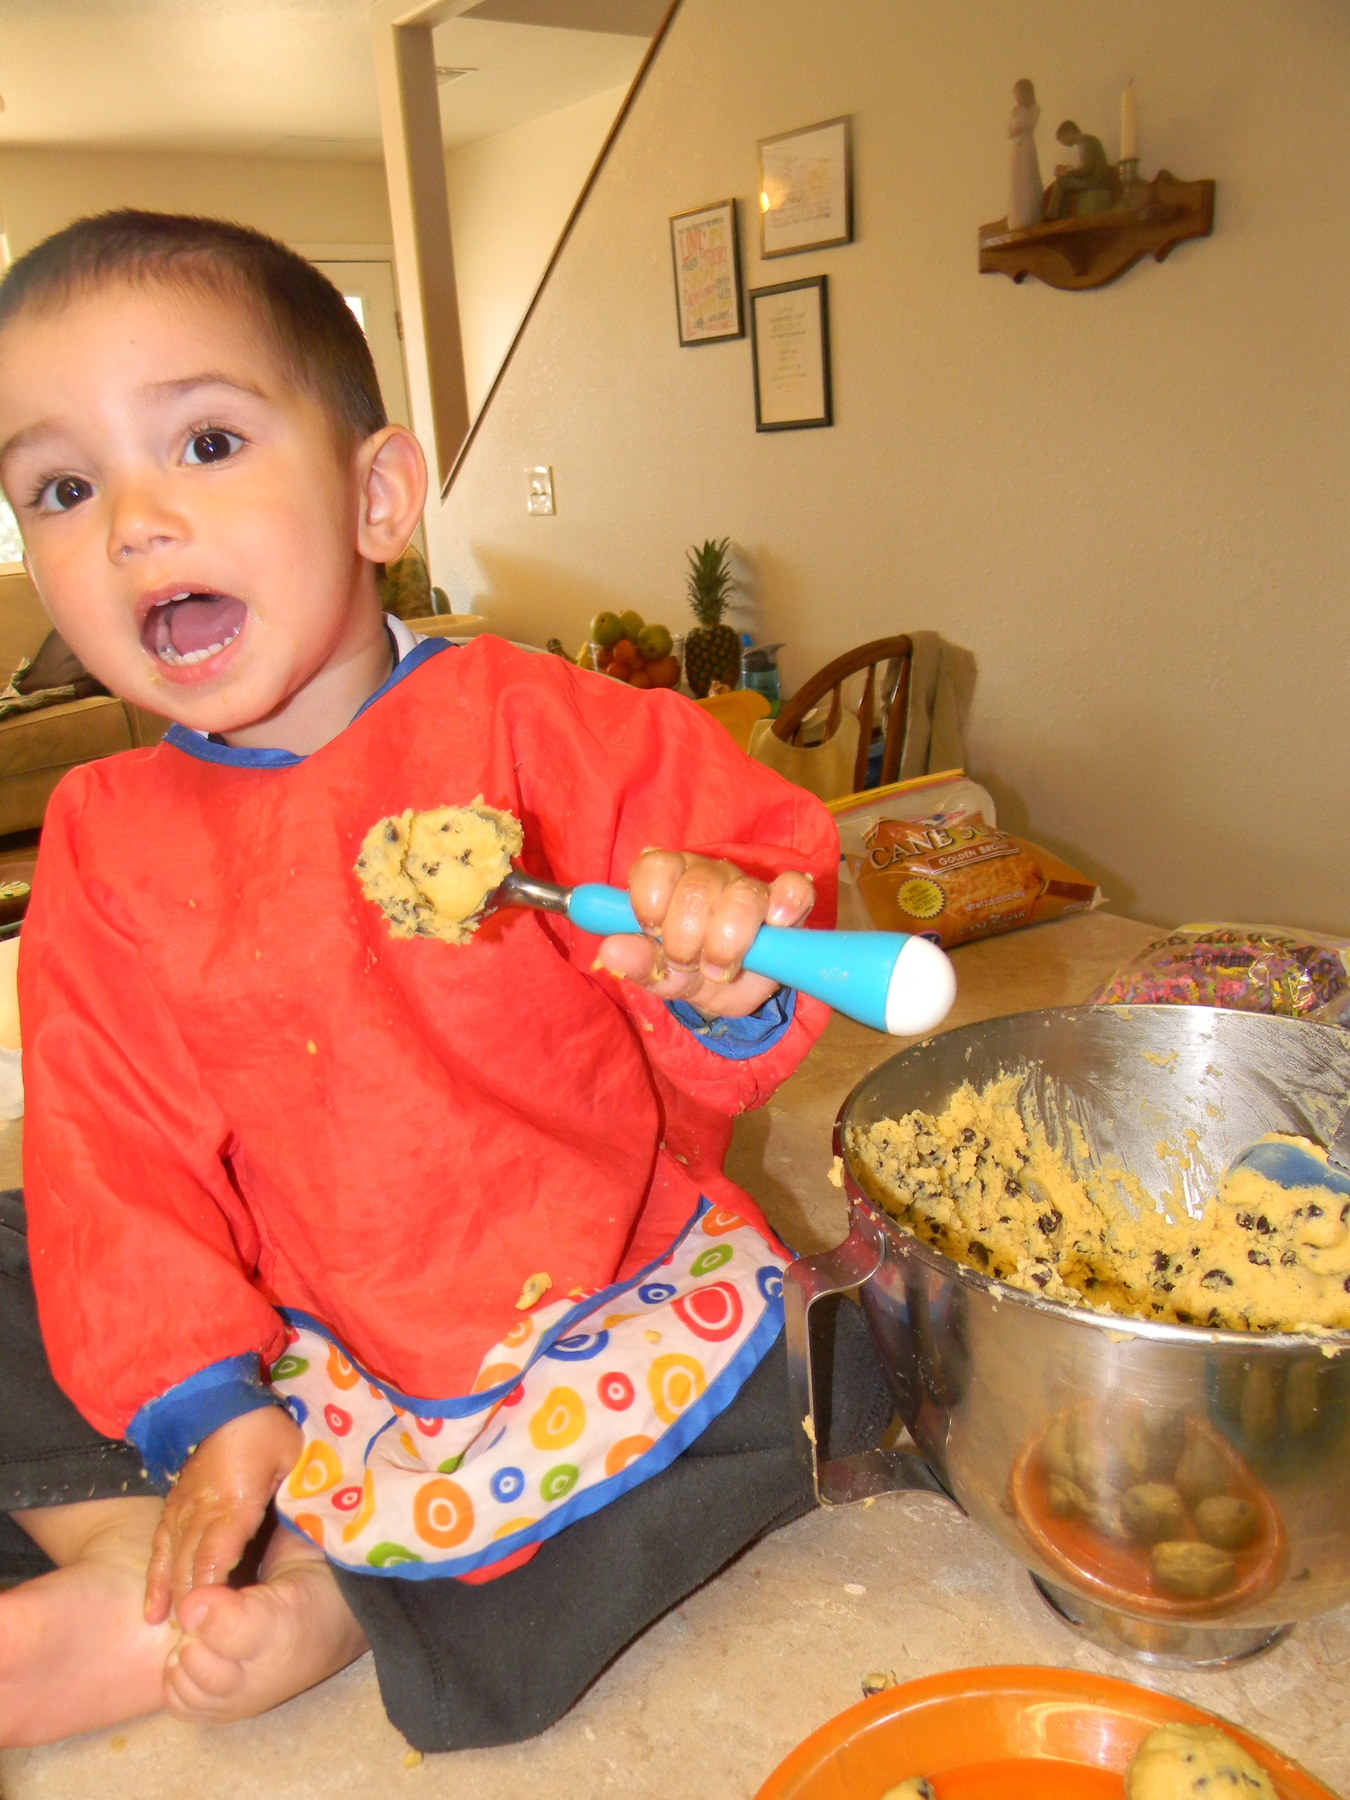 Judah helping me make cookies (which mainly involved eating raw cookie batter when I wasn't paying attention)